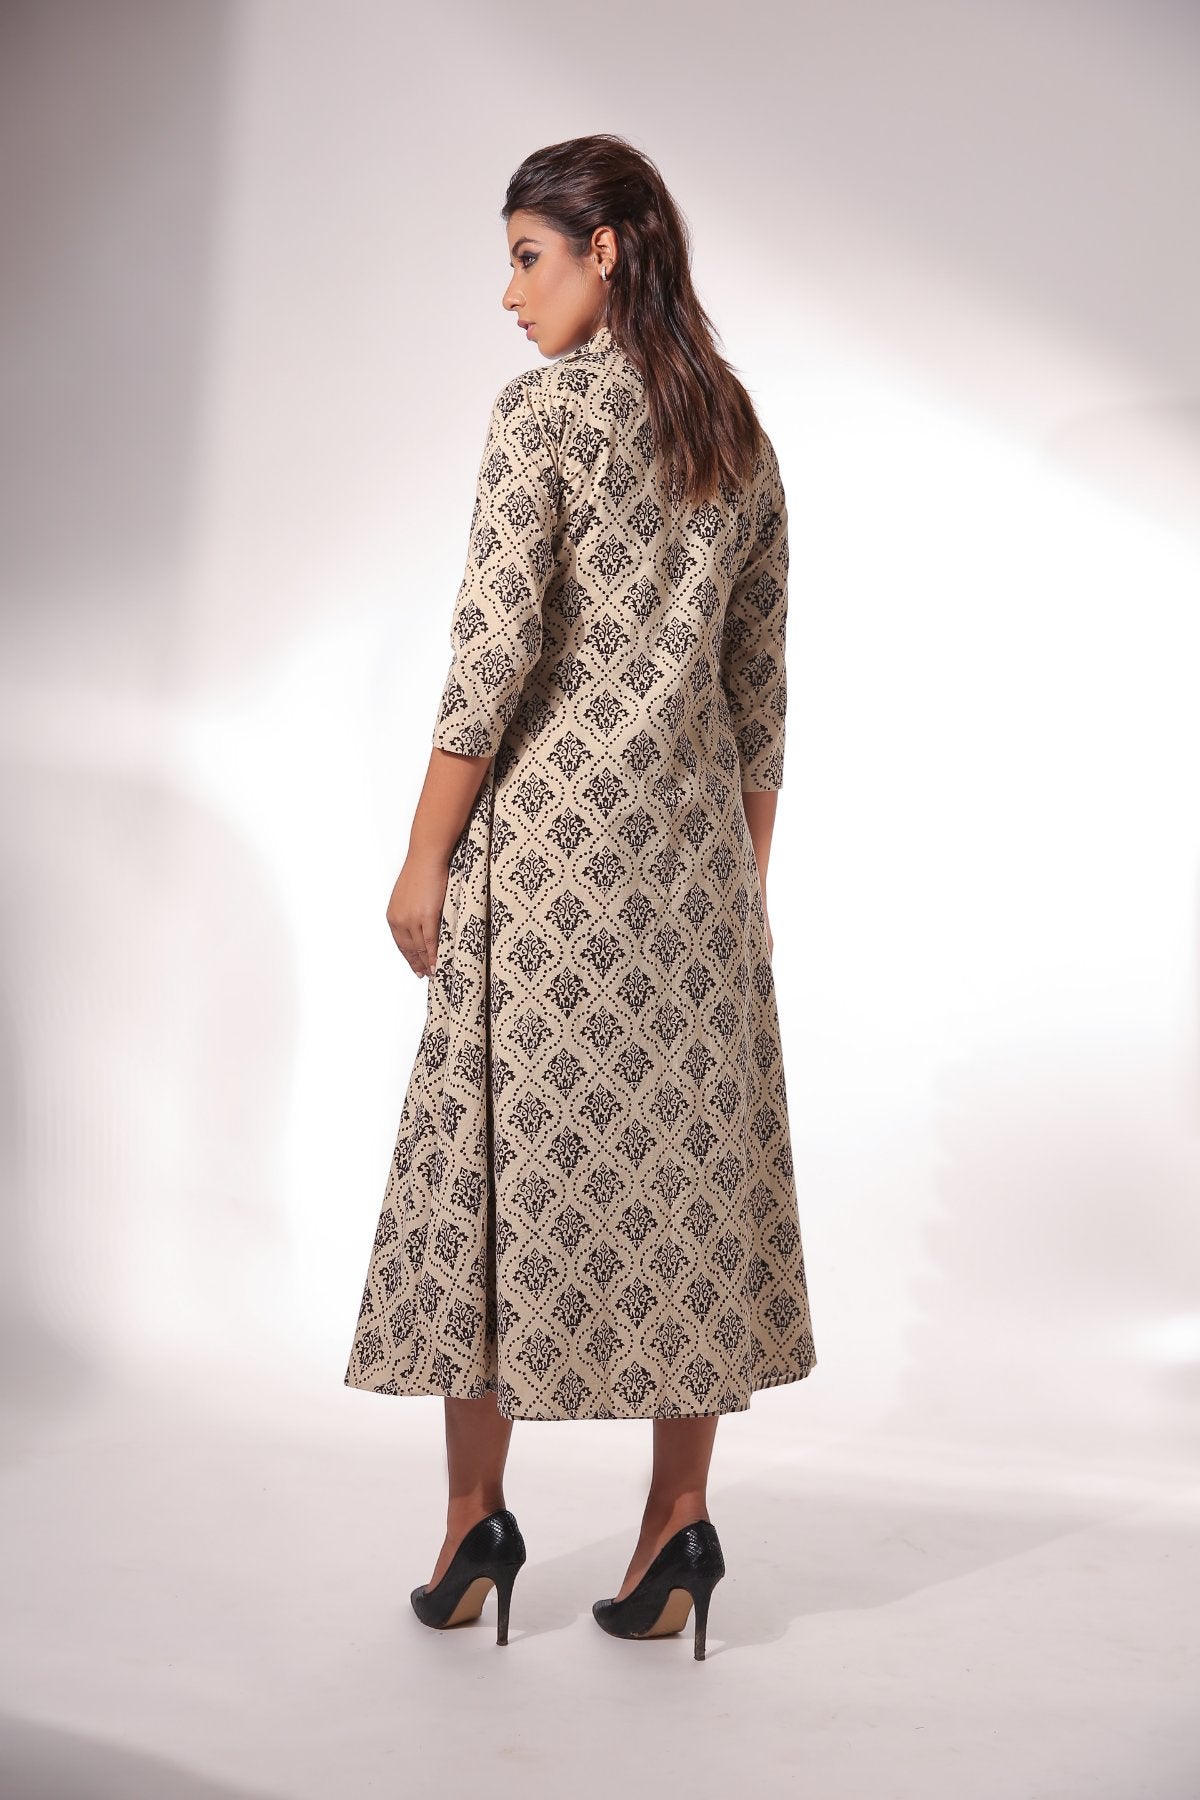 Block Printed Cape with Maxi Dress by Keva with Beige, Best Selling, Black, Block Prints, Cape, Co-ord Sets, Cotton, Dress Sets, Natural, Relaxed Fit, Resort Wear, Womenswear, Zima at Kamakhyaa for sustainable fashion